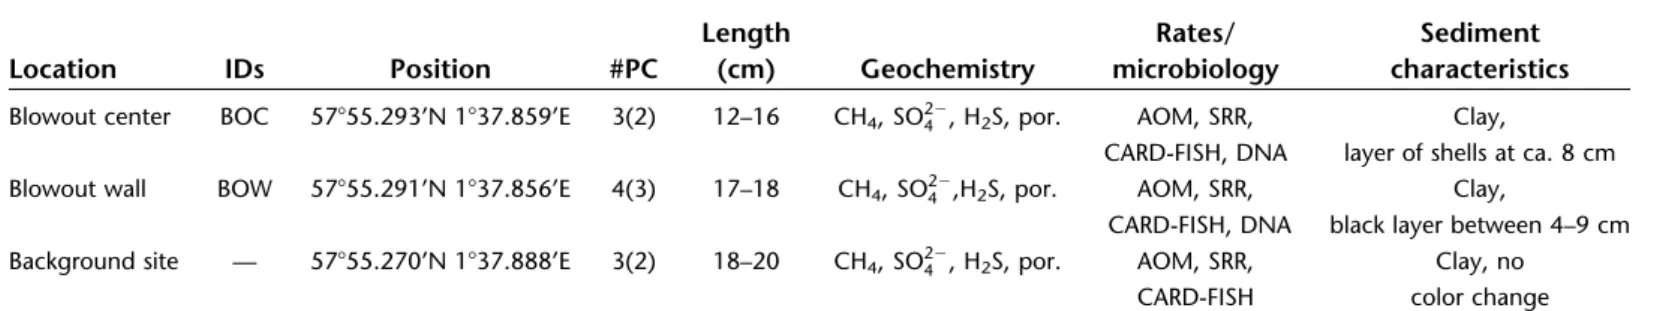 Table 1. List of sediment sampling locations and parameters measured during cruise CE12010.